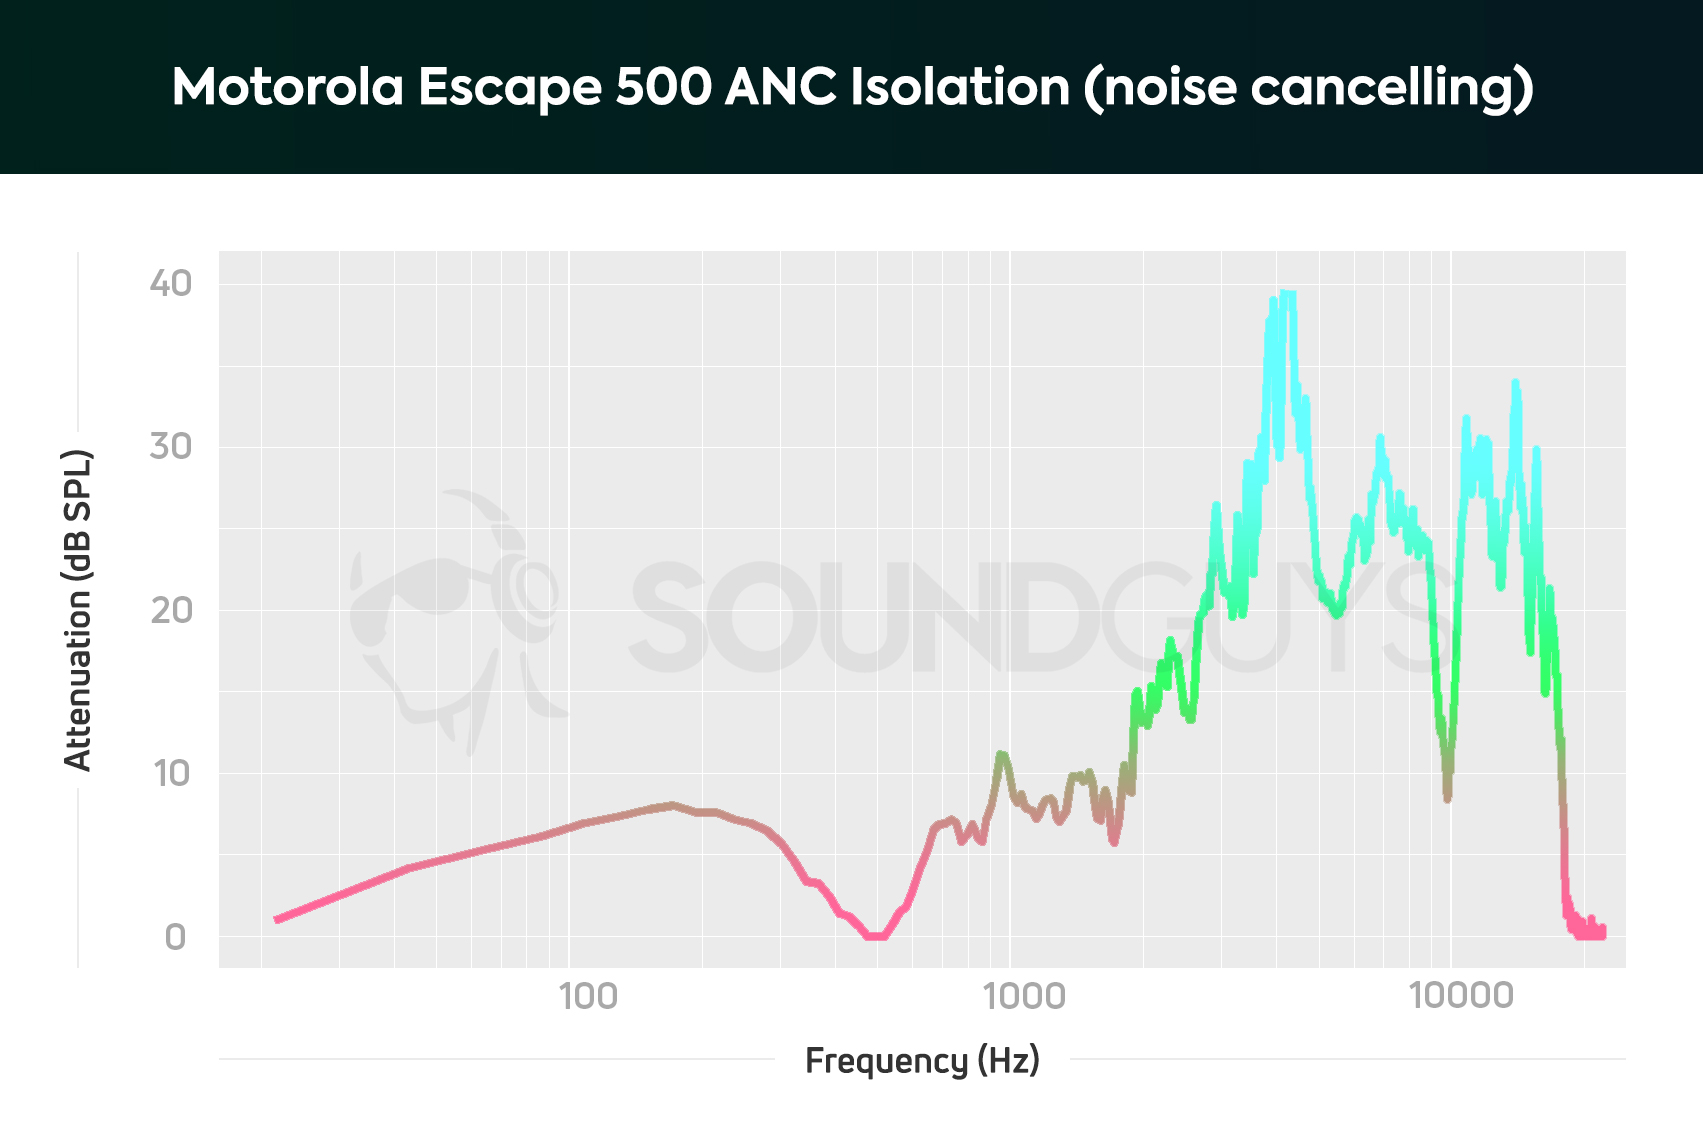 A chart depicting the Motorola Escape 500 ANC noise canceling performance which can attenuate low-frequencies a bit when an optimal fit is achieved.